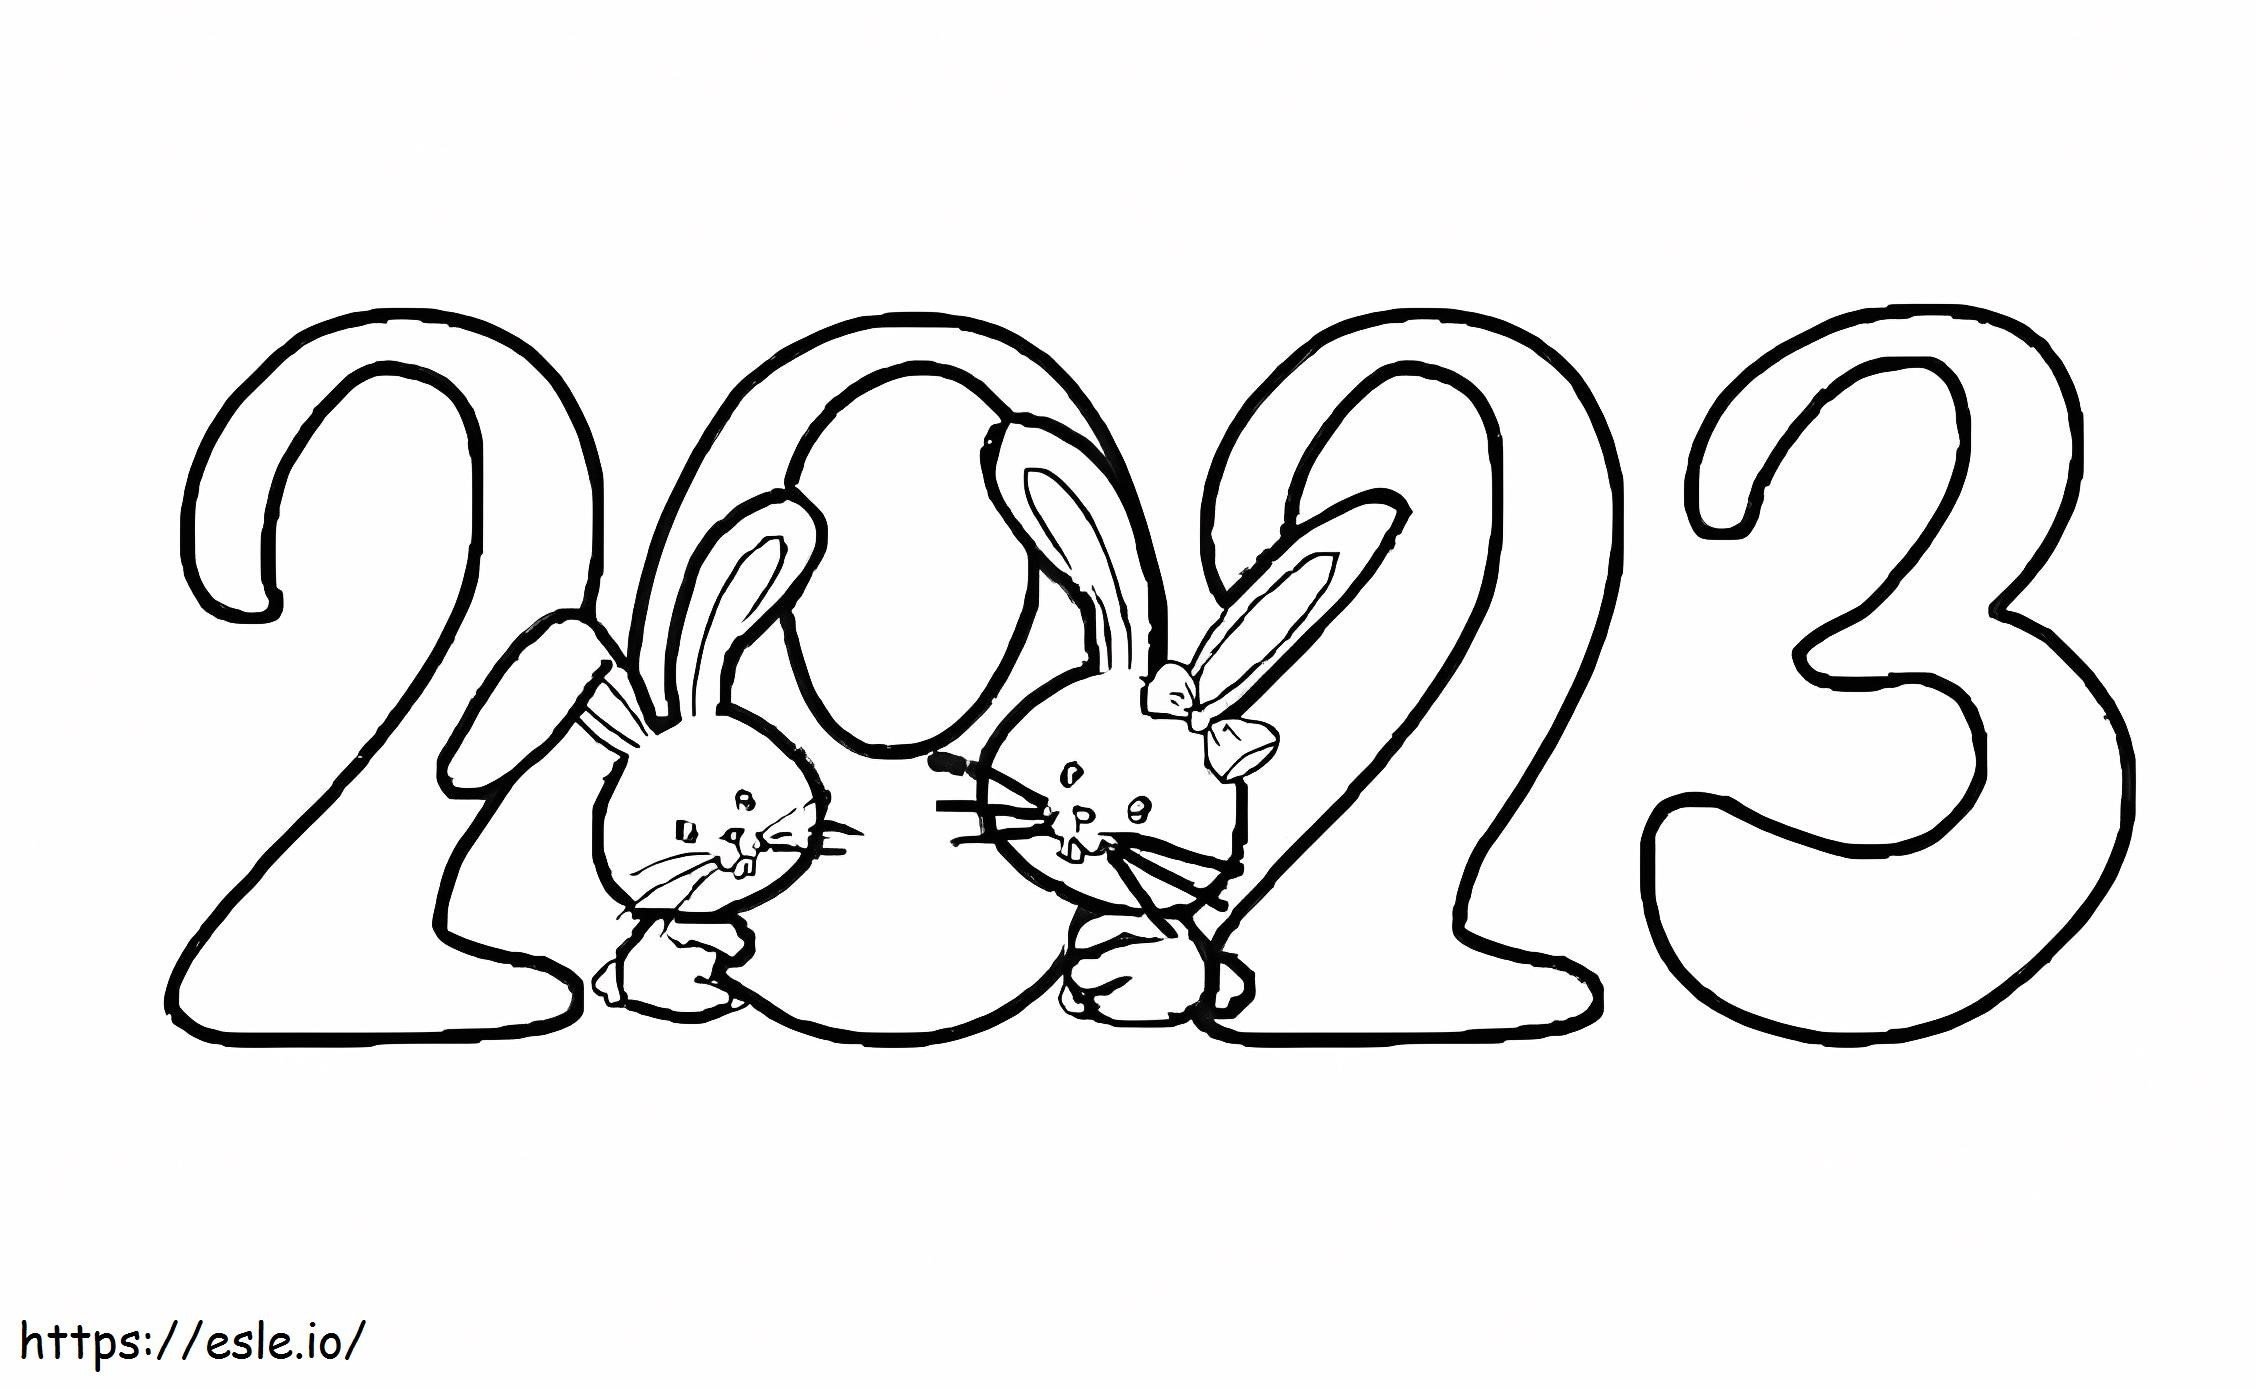 Year 2023 With Bunnies coloring page